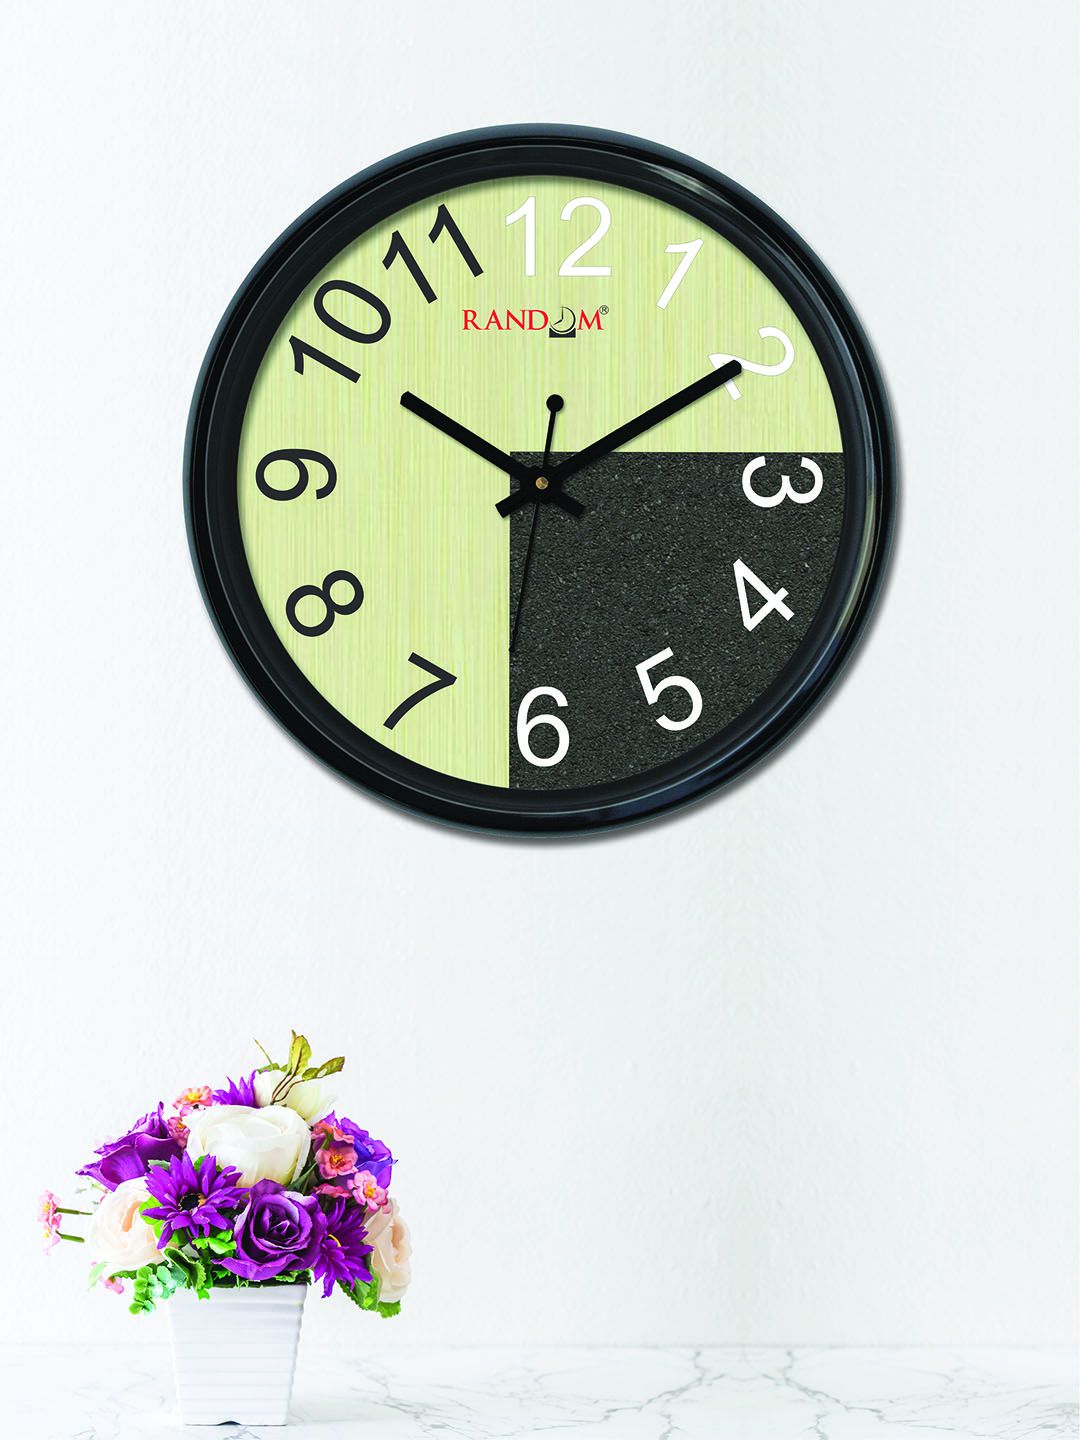 RANDOM Lime Green & Black Round Printed 30 cm Analogue Wall Clock Price in India